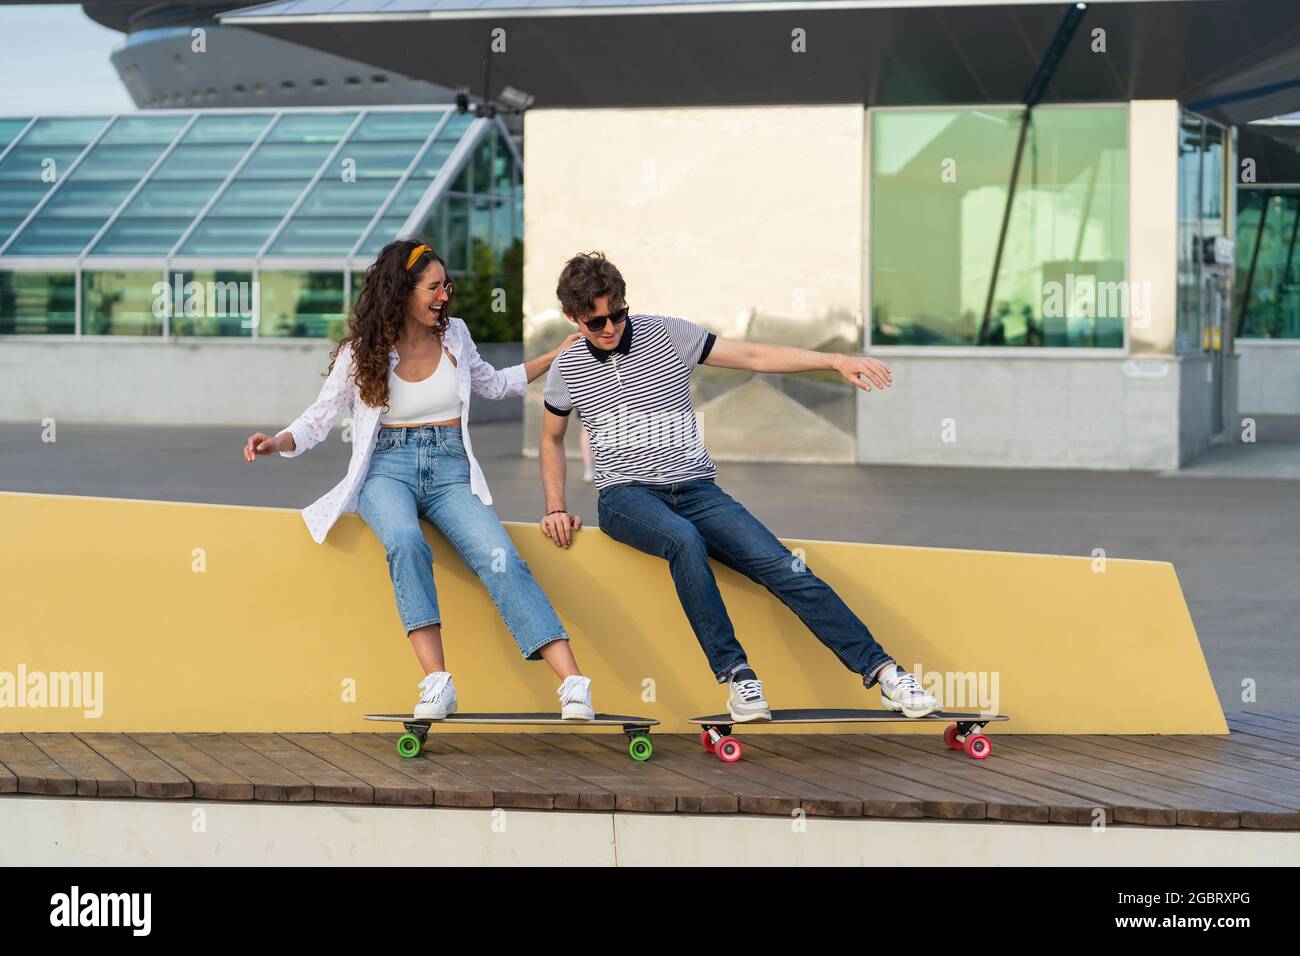 Carefree hipster man and woman young couple having fun after skateboarding laugh enjoy time together Stock Photo